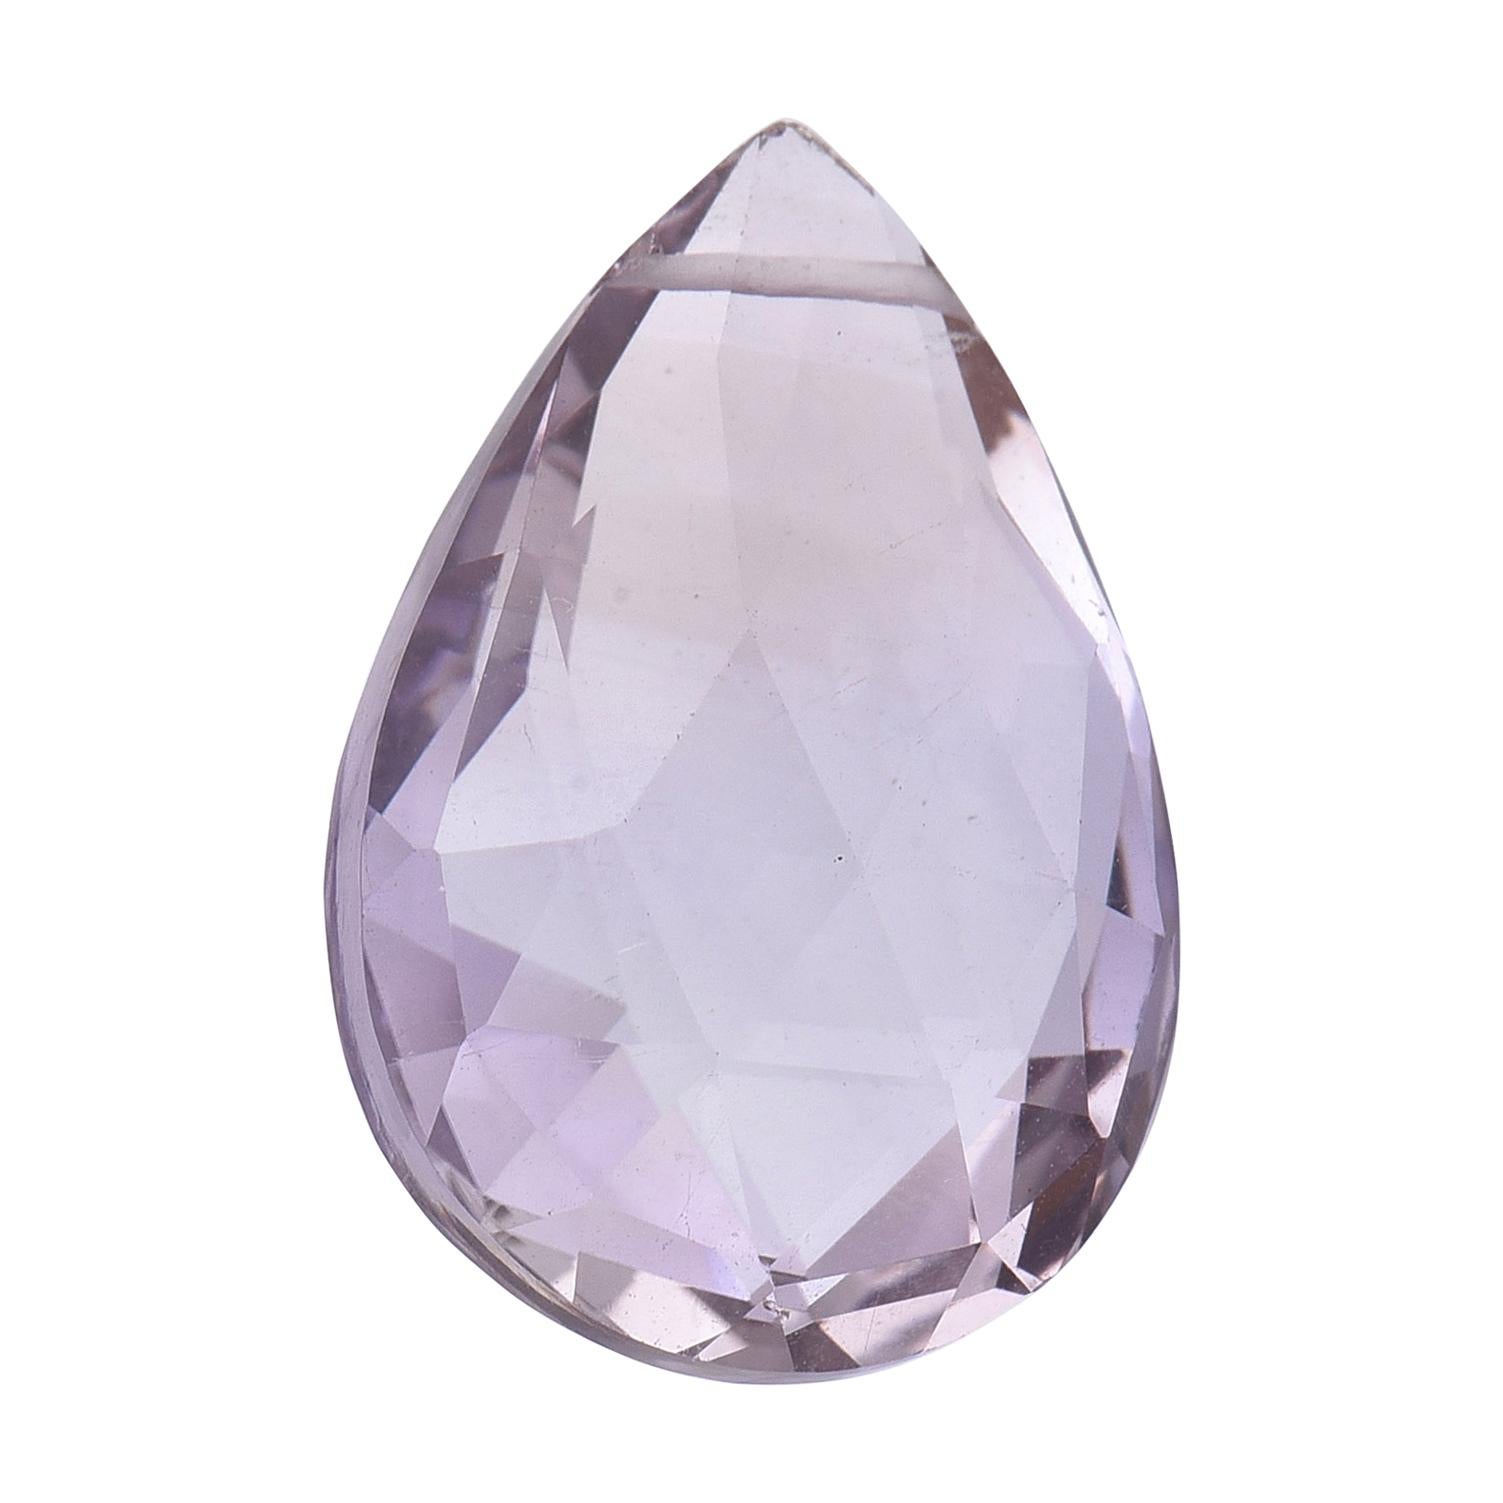 TJD Loose Natural Amethyst 11.55 Cts Pear Shape Gemstone for Any Jewellery For Sale